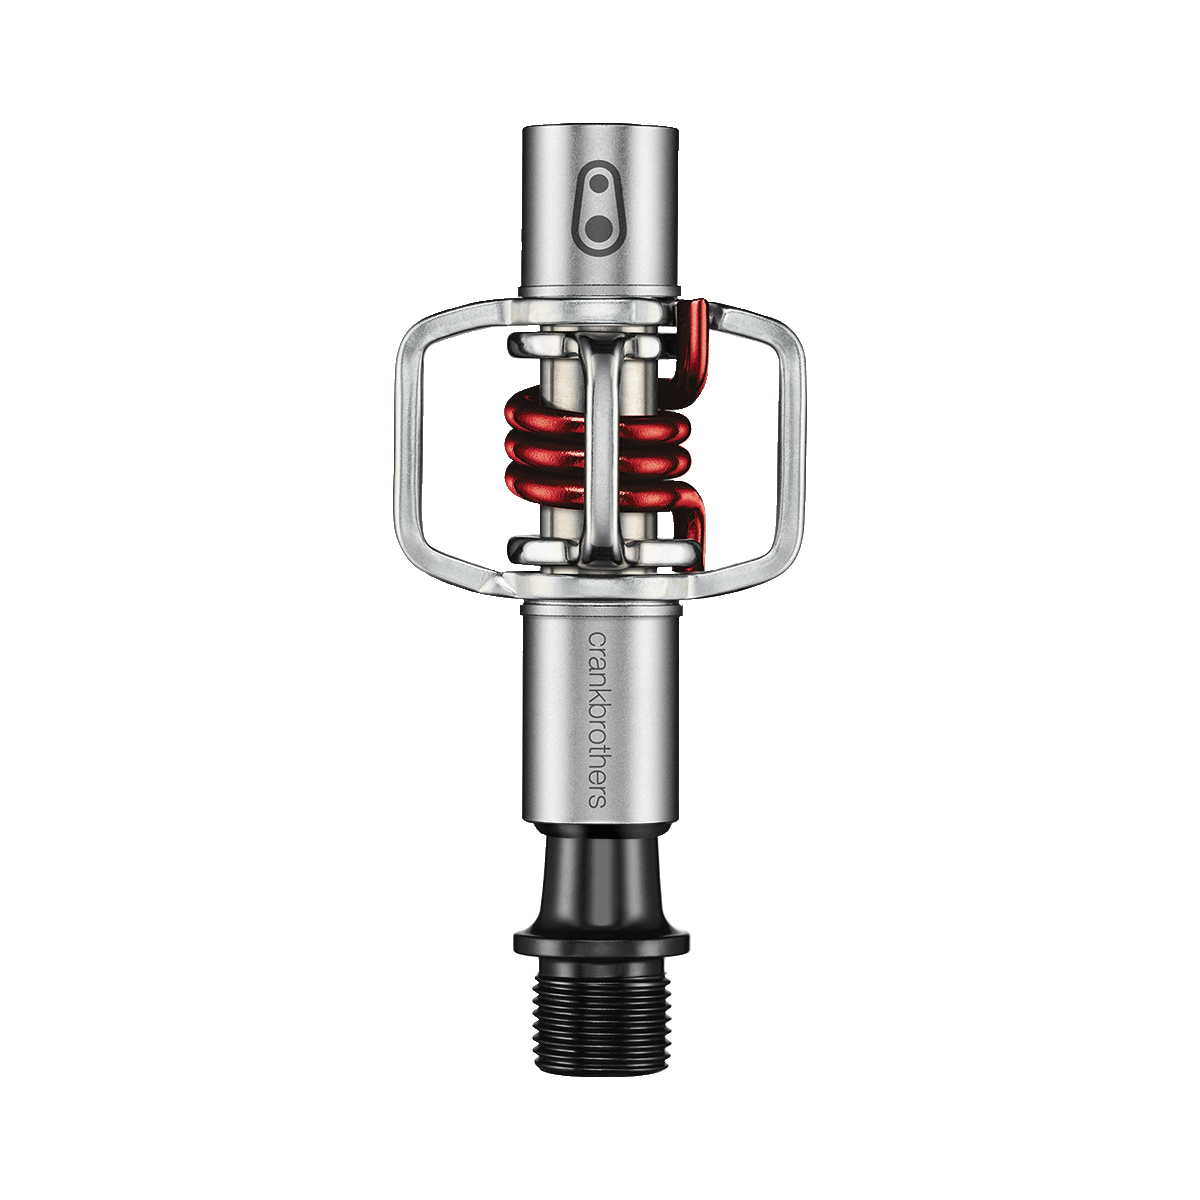 Pedale tip clipless CrankBrothers Eggbeater 1